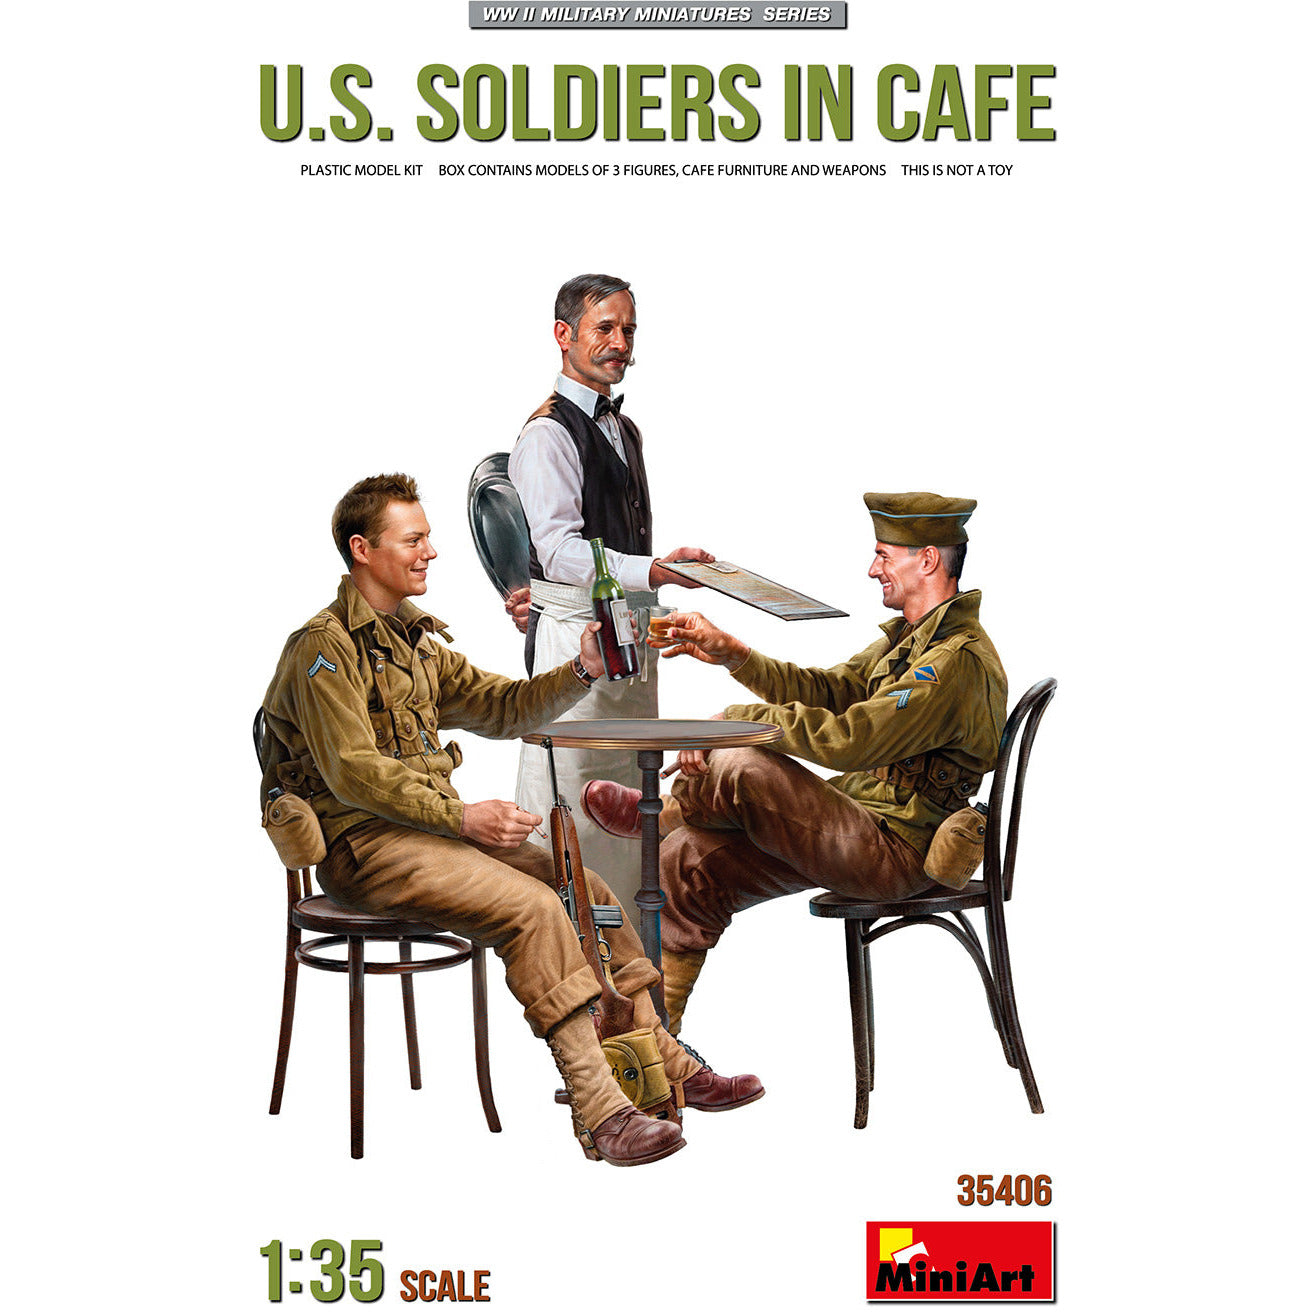 MINIART 1/35 U.S. Soldiers in Cafe